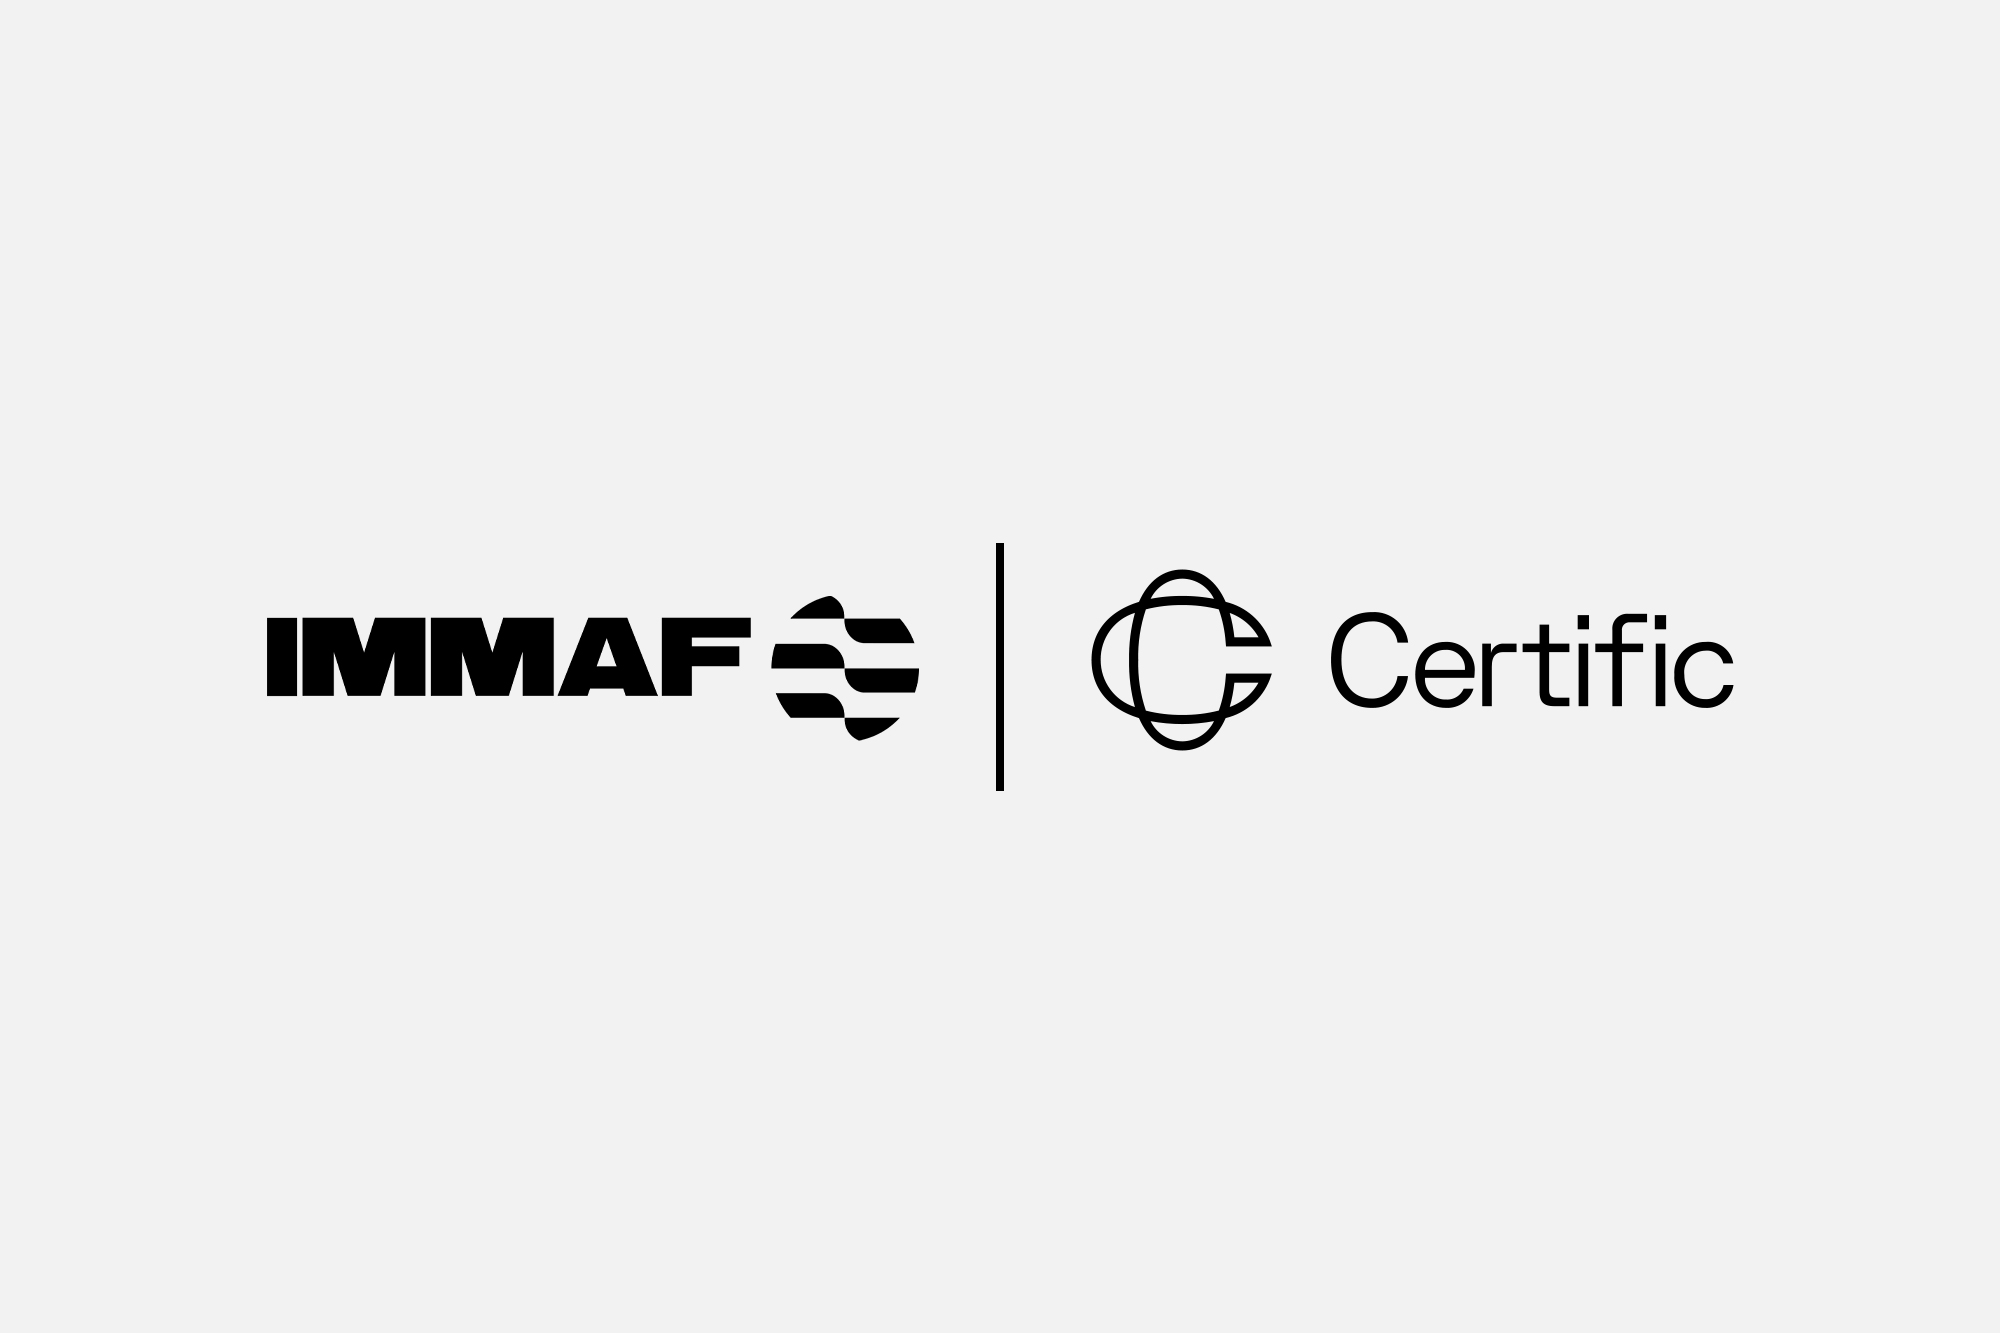 IMMAF partners with Certific for Concussion Awareness training